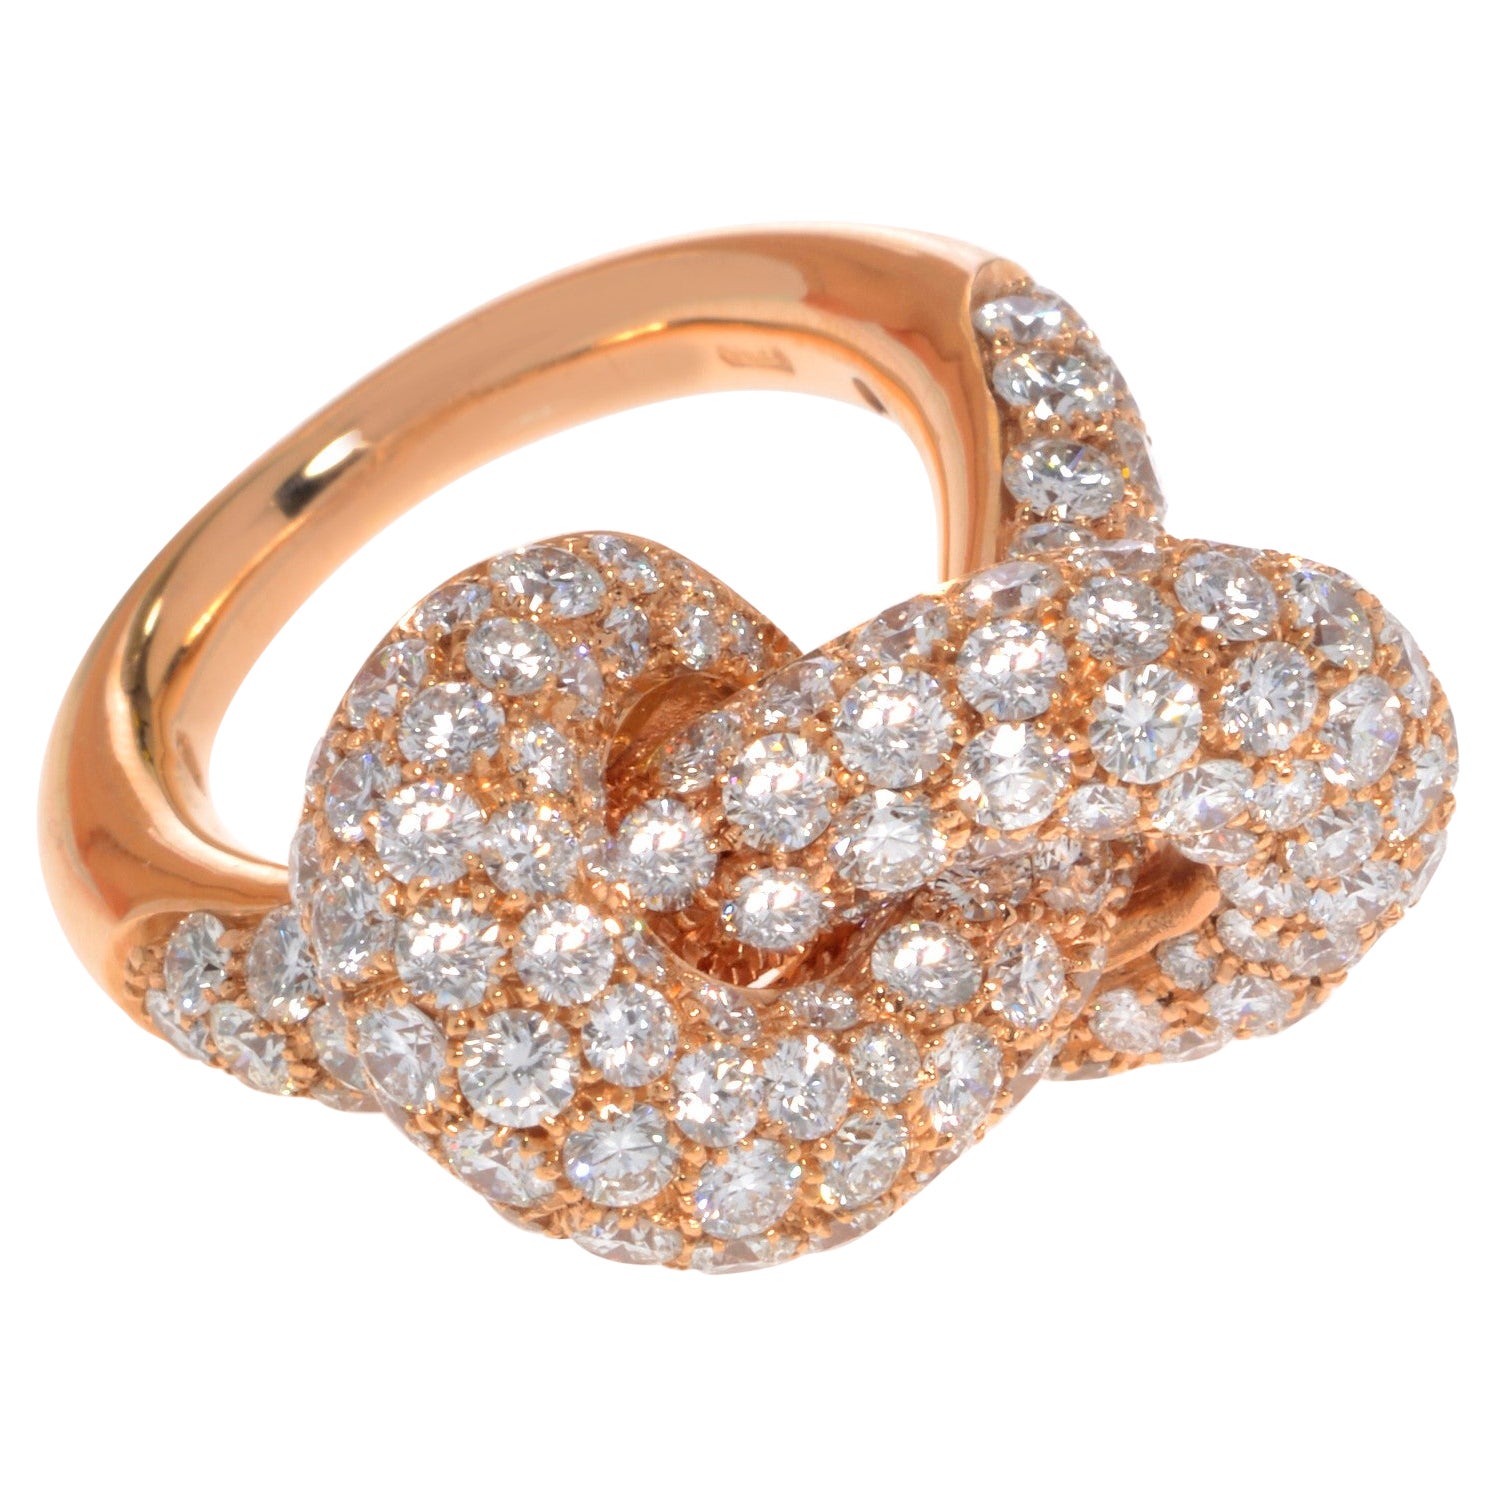 Luca Carati Diamond Wide Knot Ladies Ring 18K Rose Gold 5.05Cttw Size 5.25 For Sale